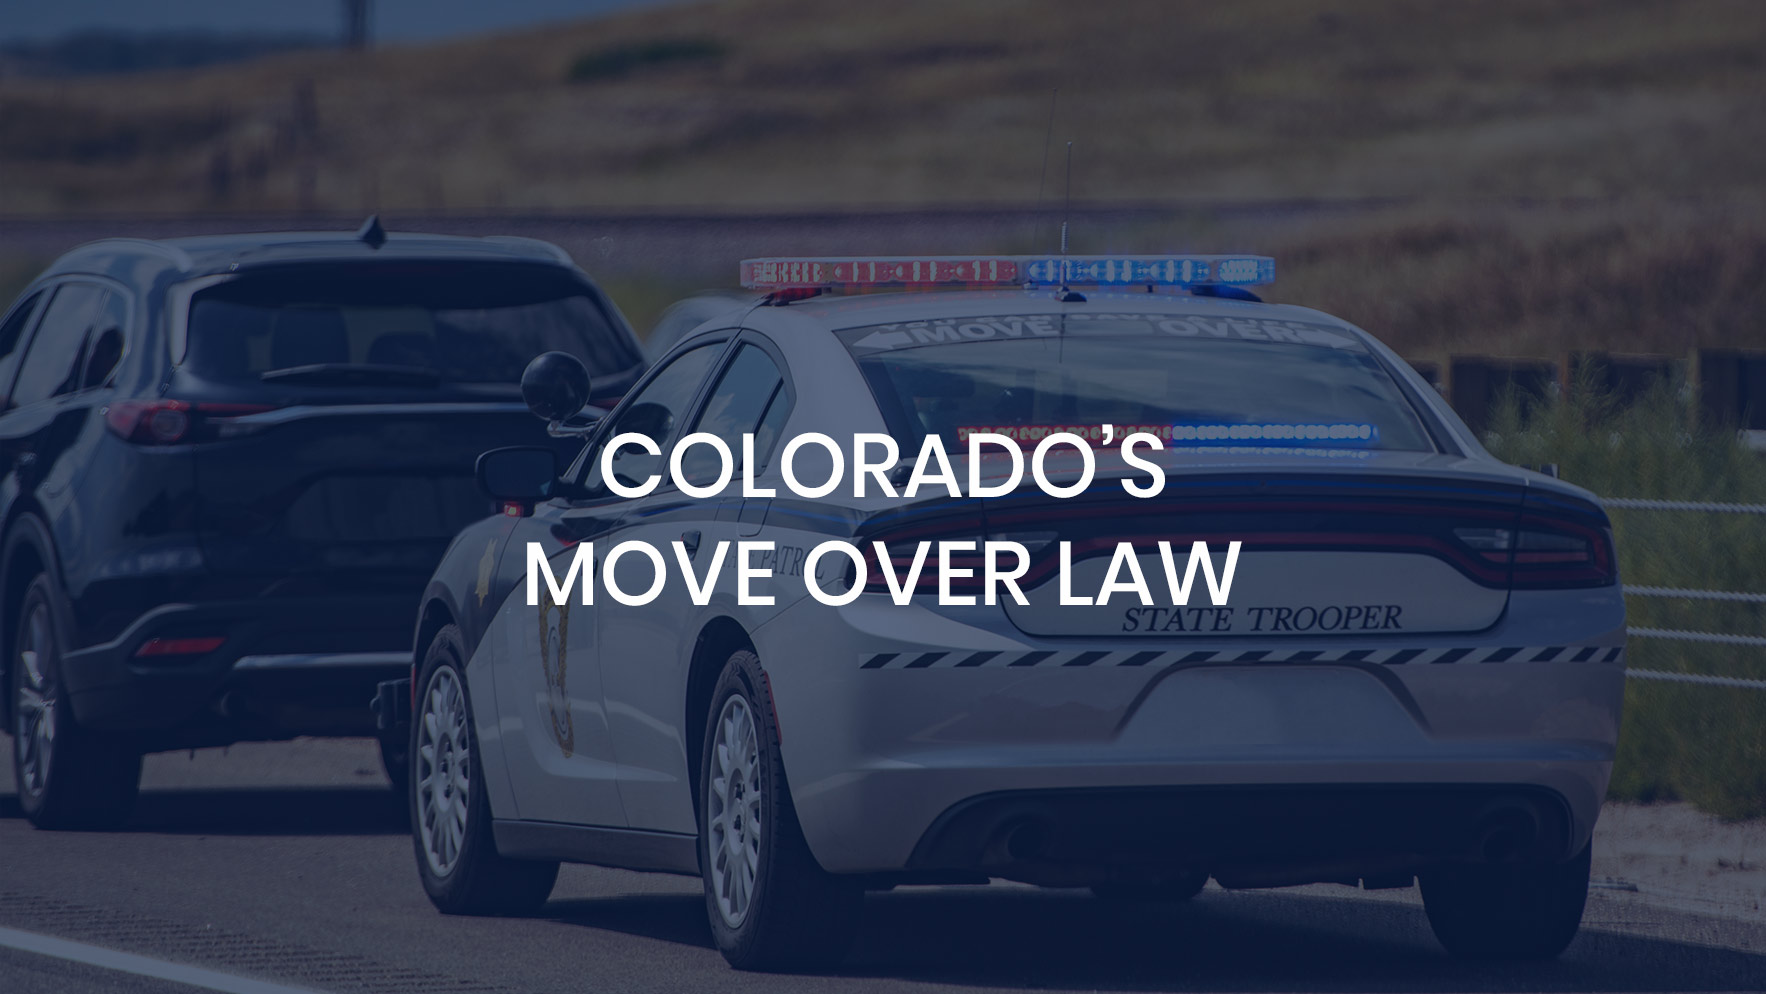 What is Colorado's Move Over Law? Denver, CO